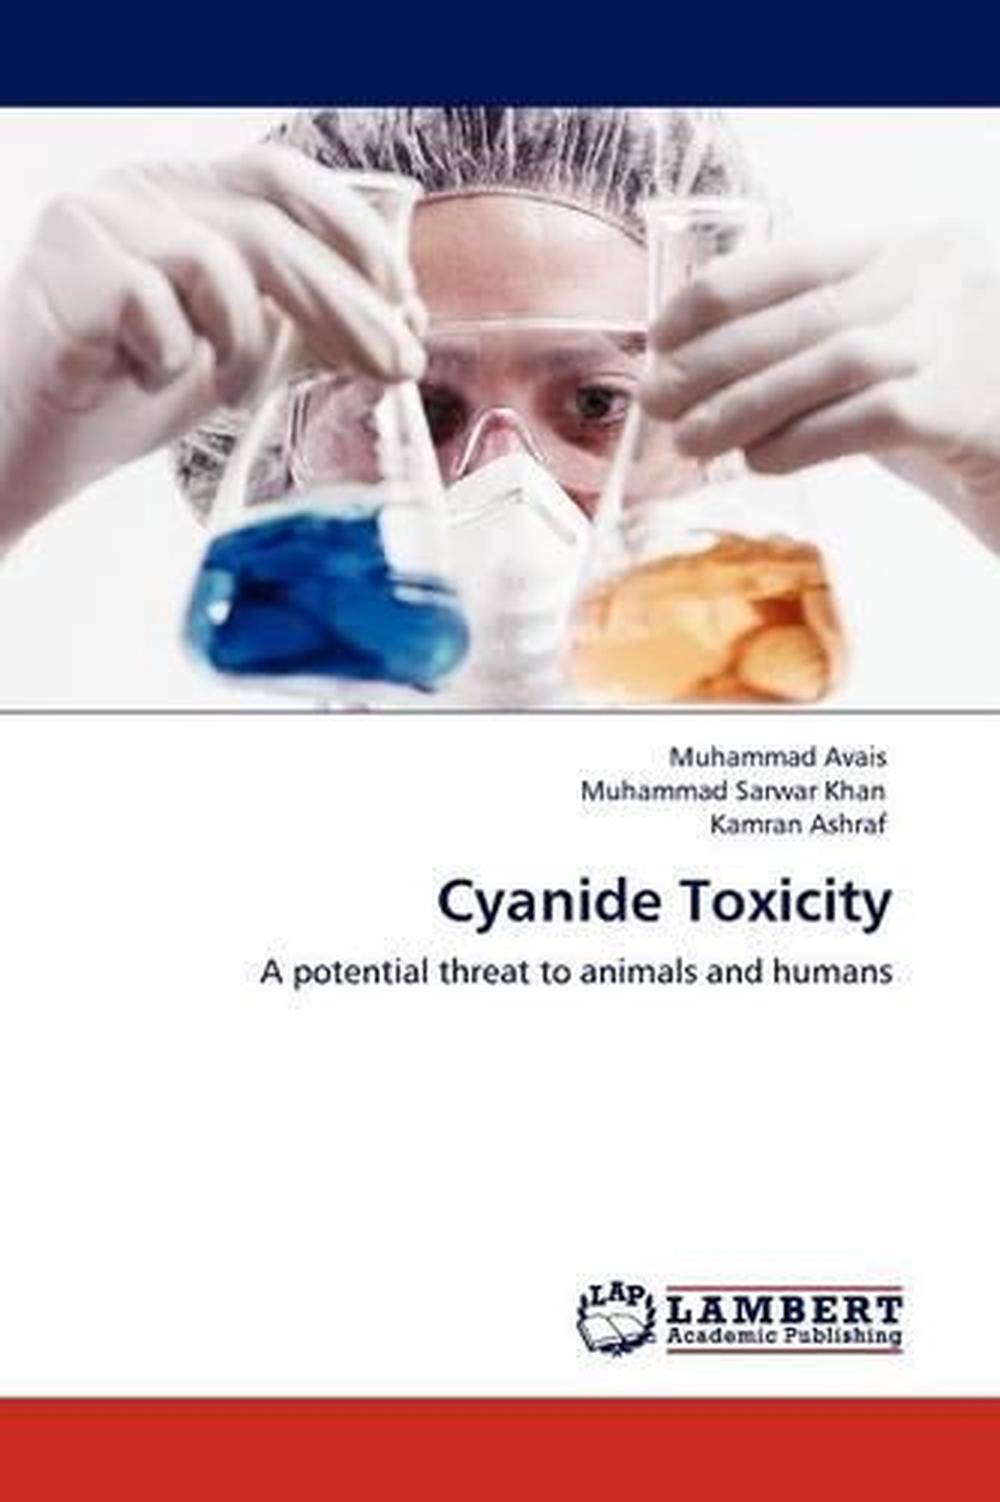 antidote for cyanide poisoning